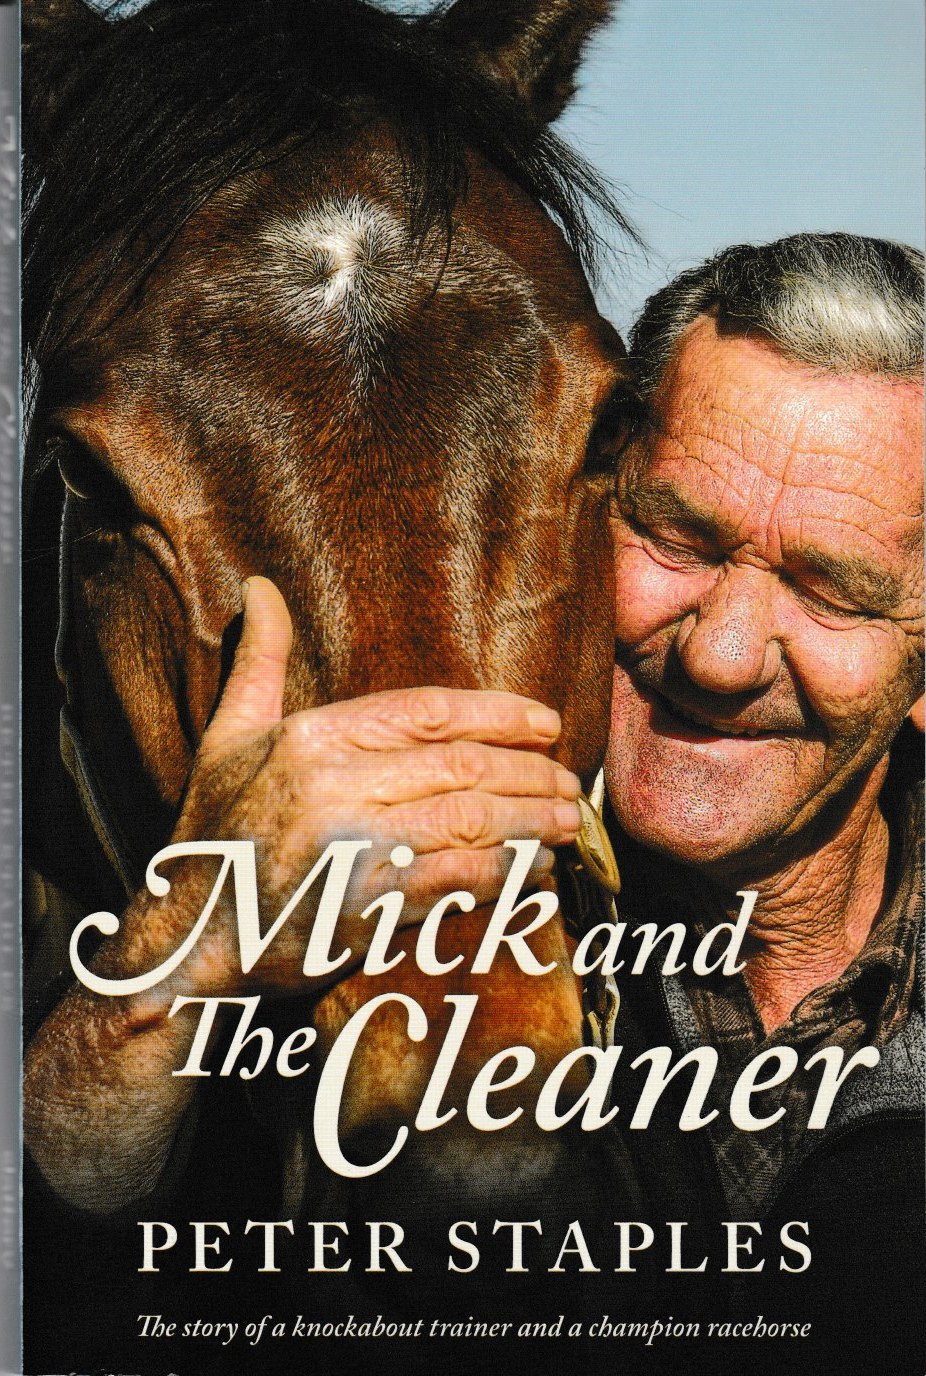 Mick and The Cleaner - the story of a knockabout trainer and a champion racehorse